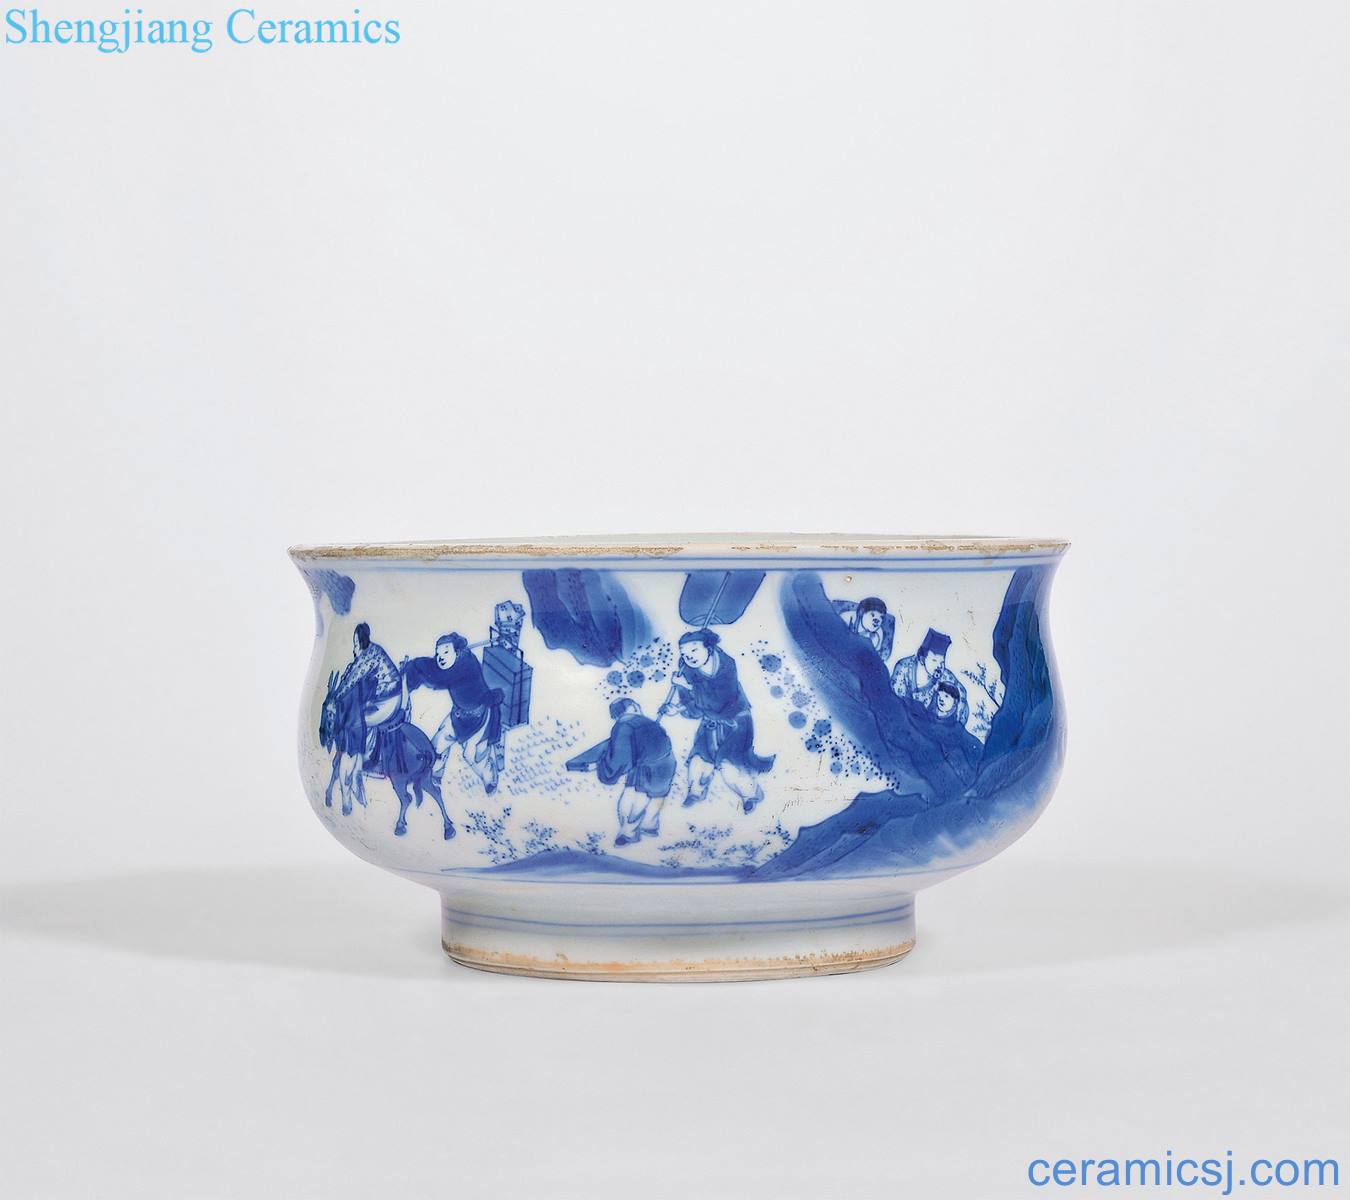 Ming chongzhen Blue and white figure furnace drinks the eight immortals characters in the story